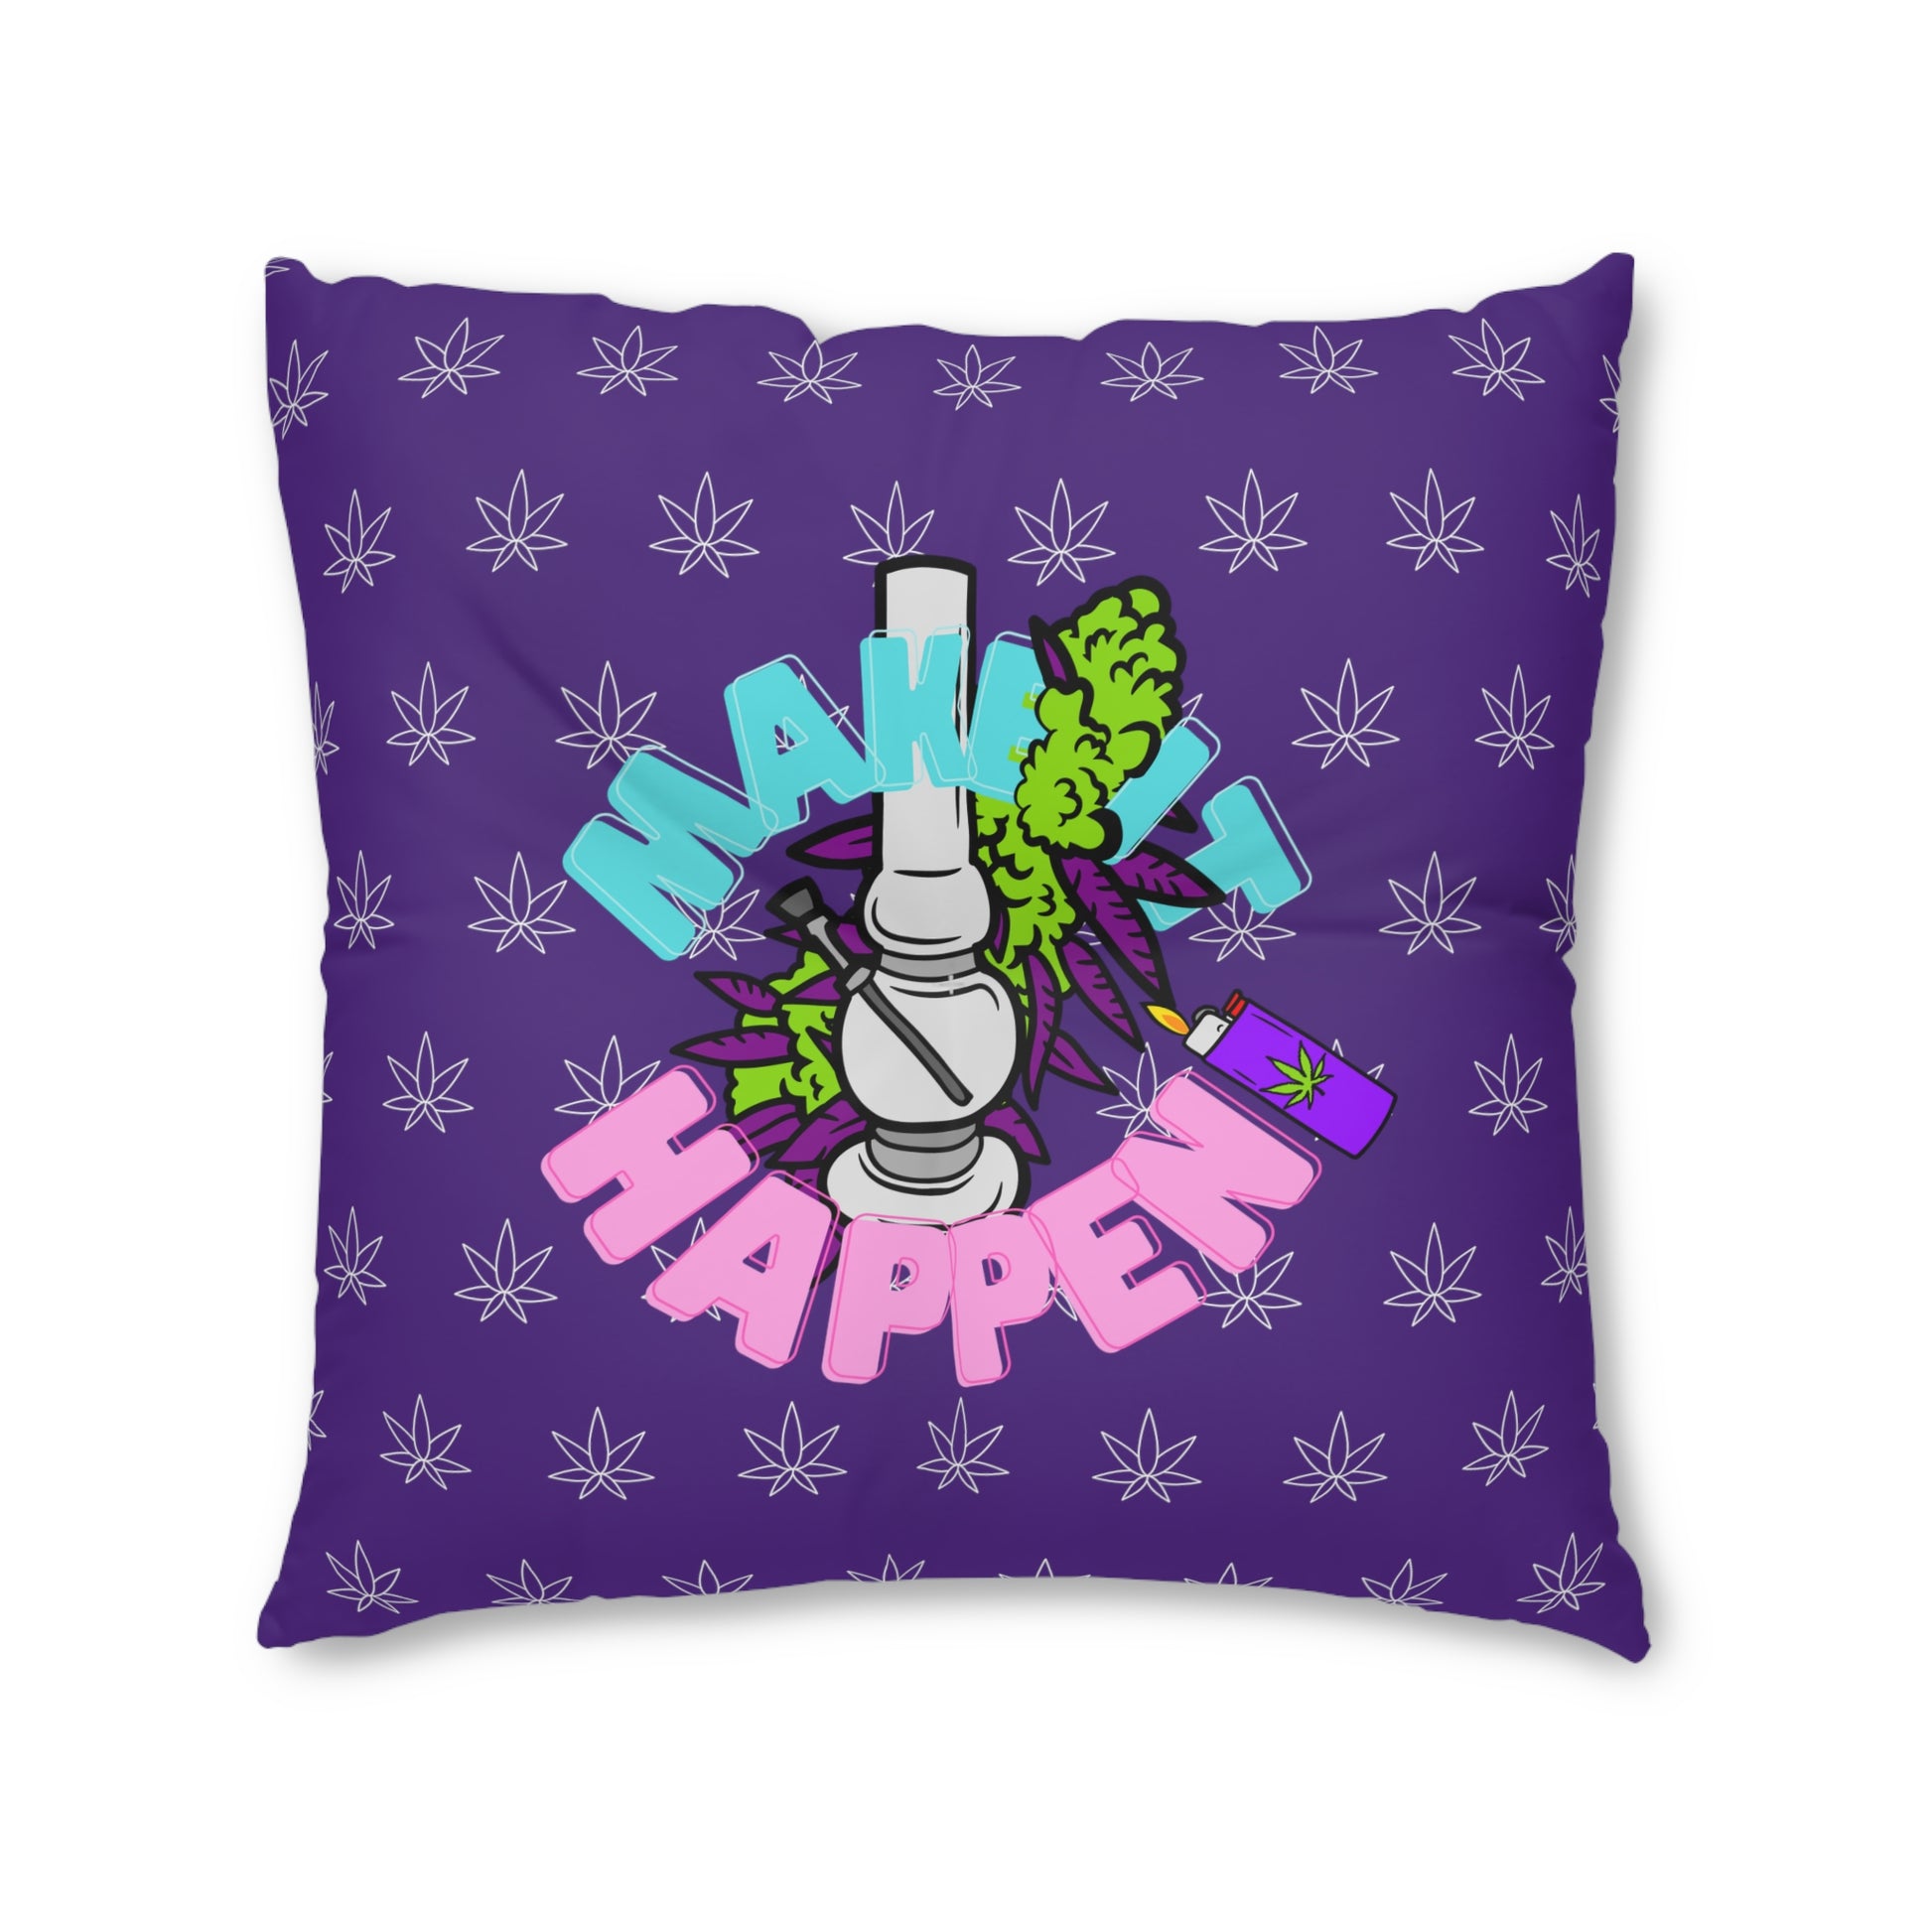 Purple Make It Happen Cannabis tufted floor pillow featuring a graphic design with a cartoon bomb, broccoli, and the phrase "make it happen" in bold letters, surrounded by small white stars.